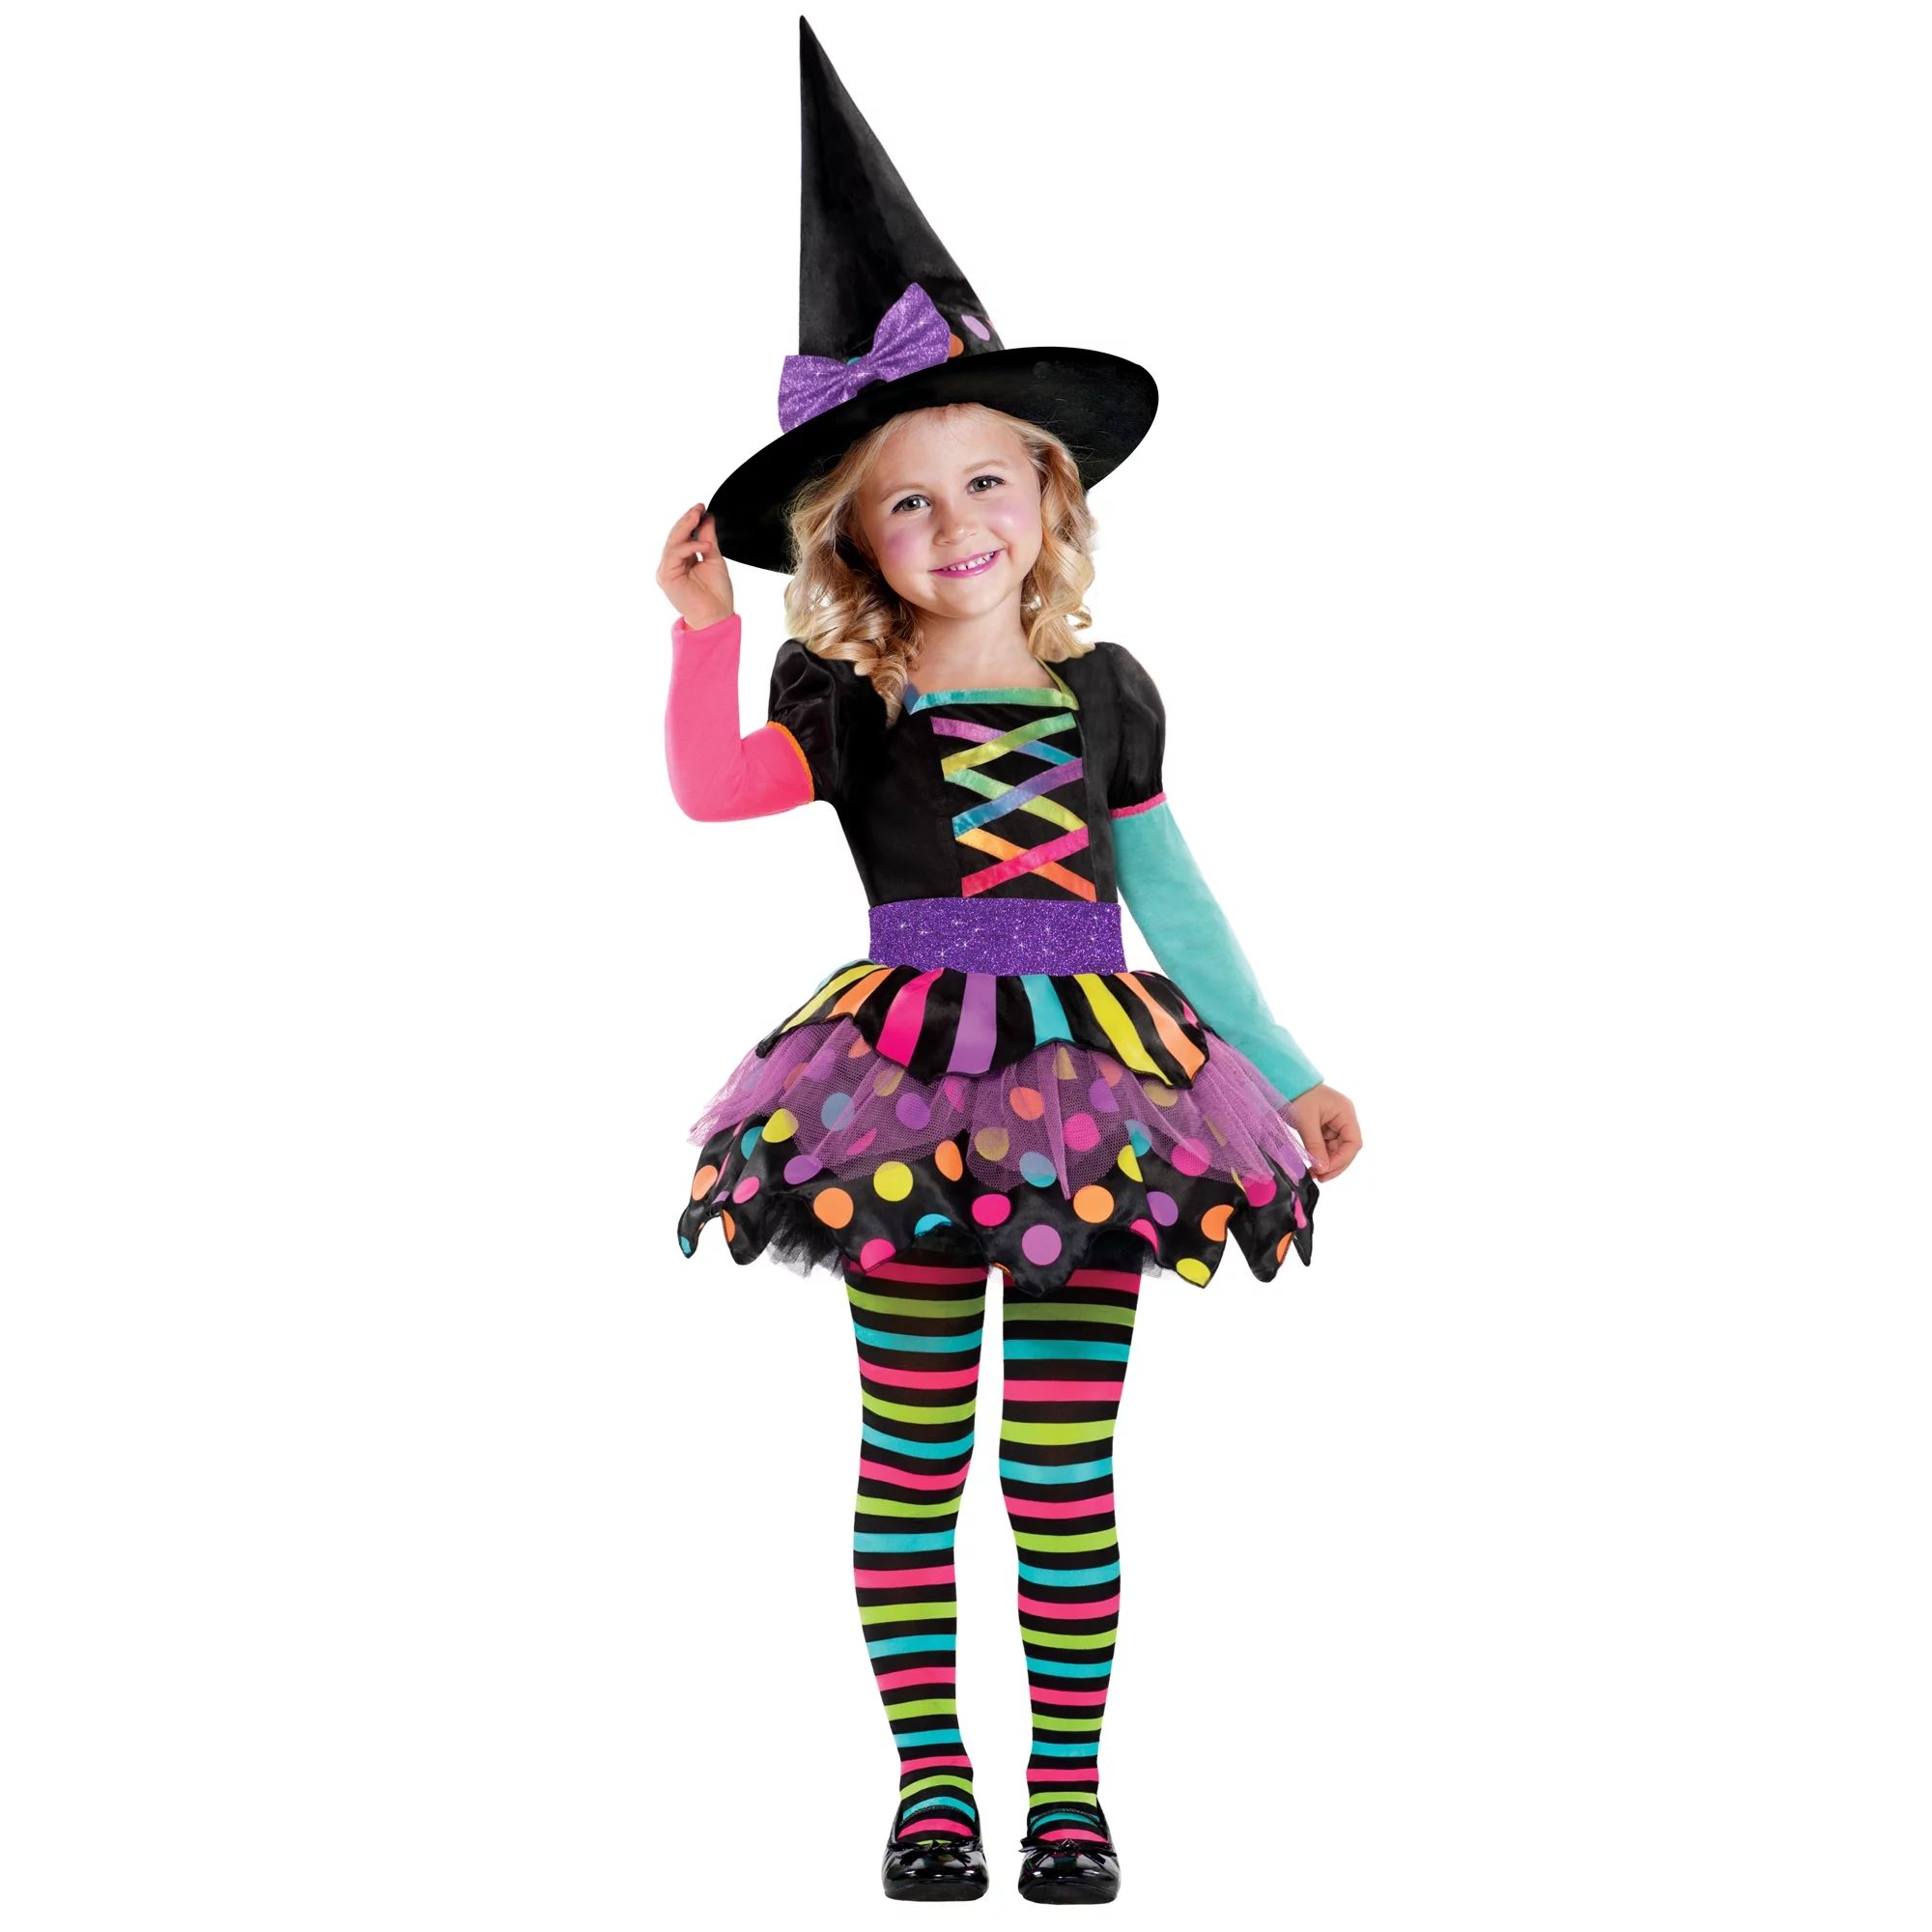 WAY TO CELEBRATE! Deluxe Witch Toddler's Halloween Fancy-Dress Costume for Toddler, 2T | Walmart (US)